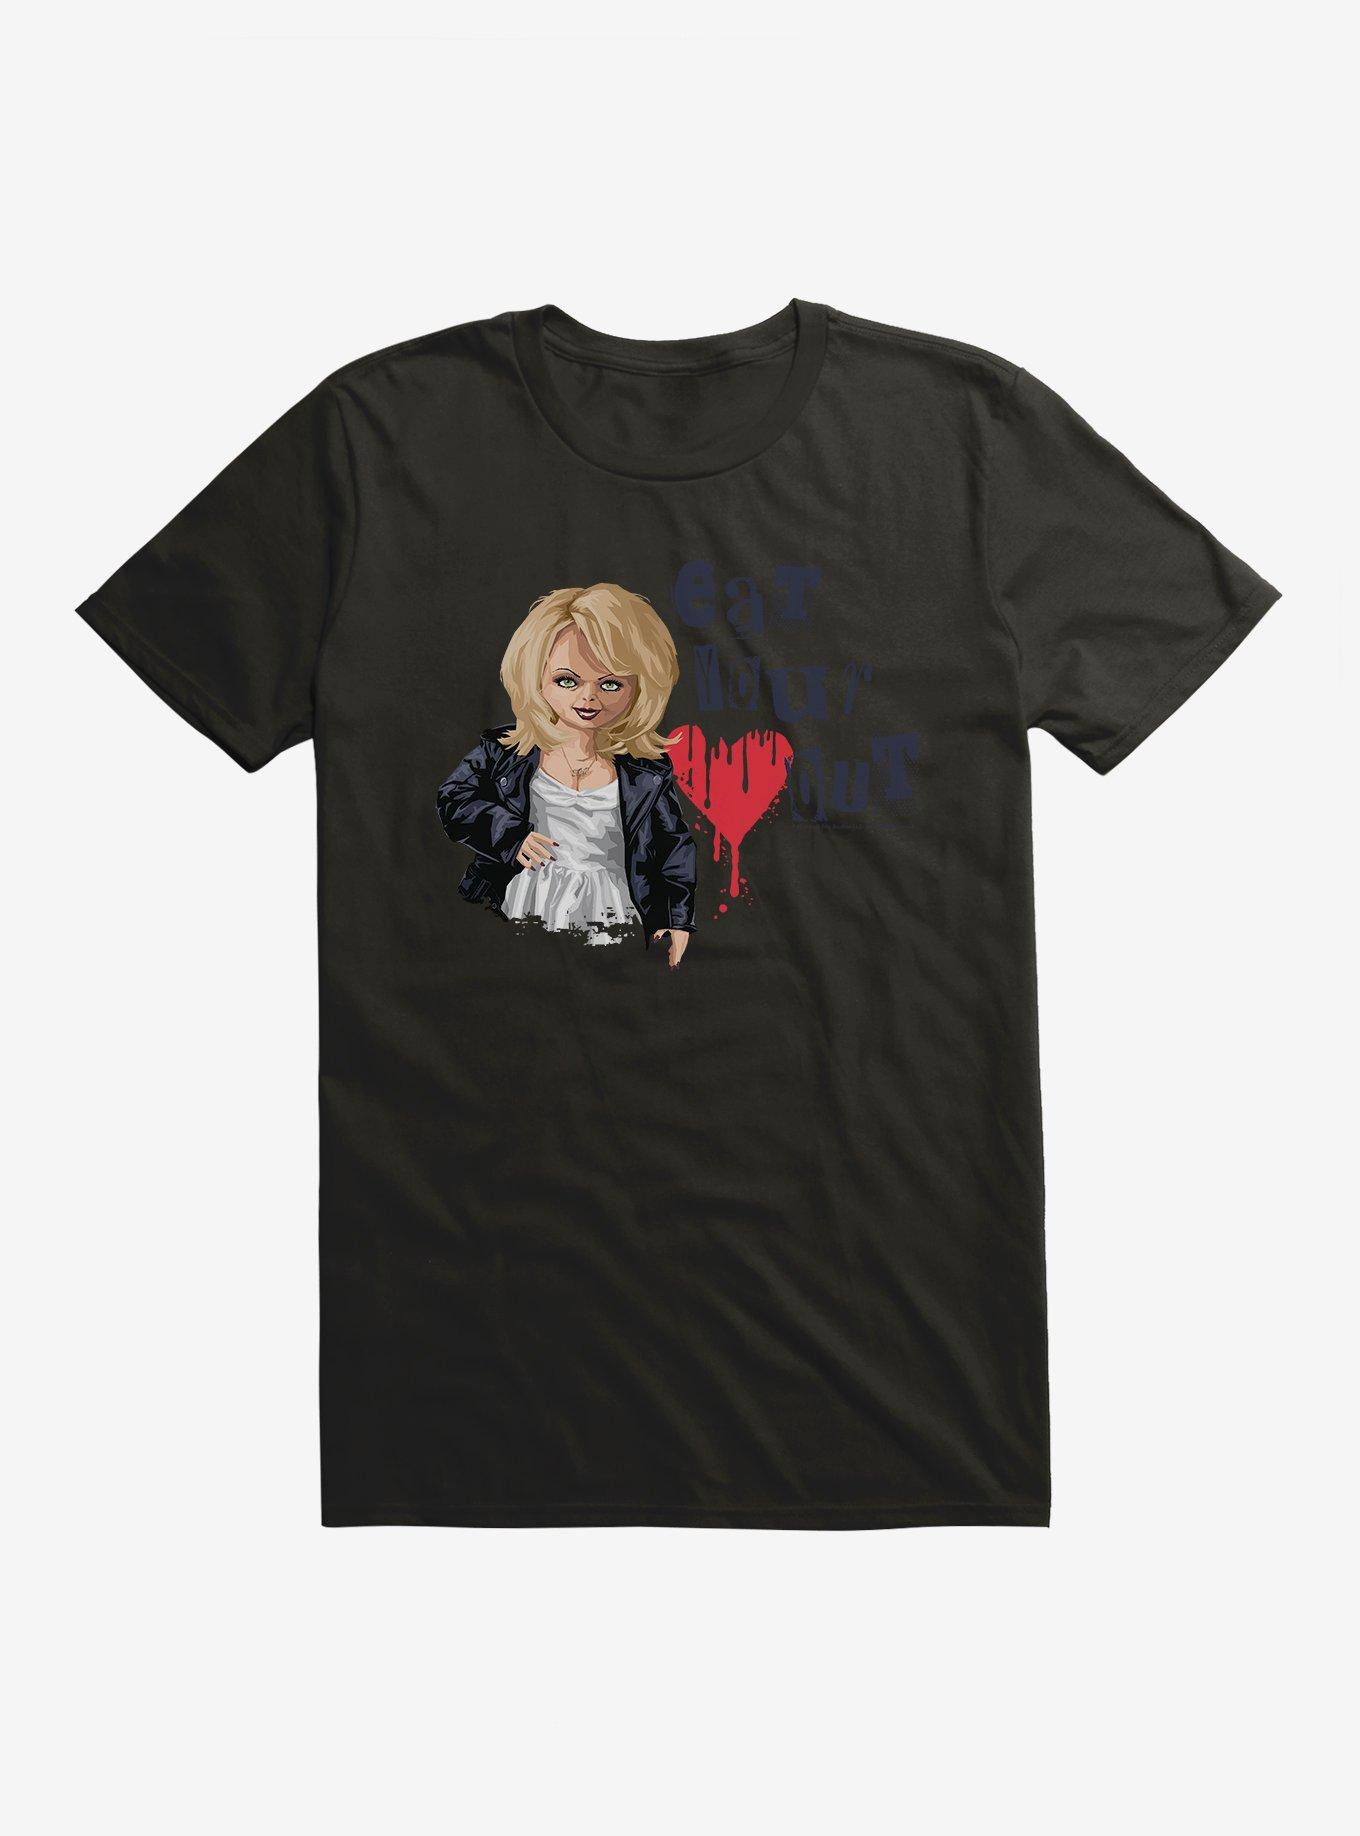 Chucky Eat Your Heart Out T-Shirt